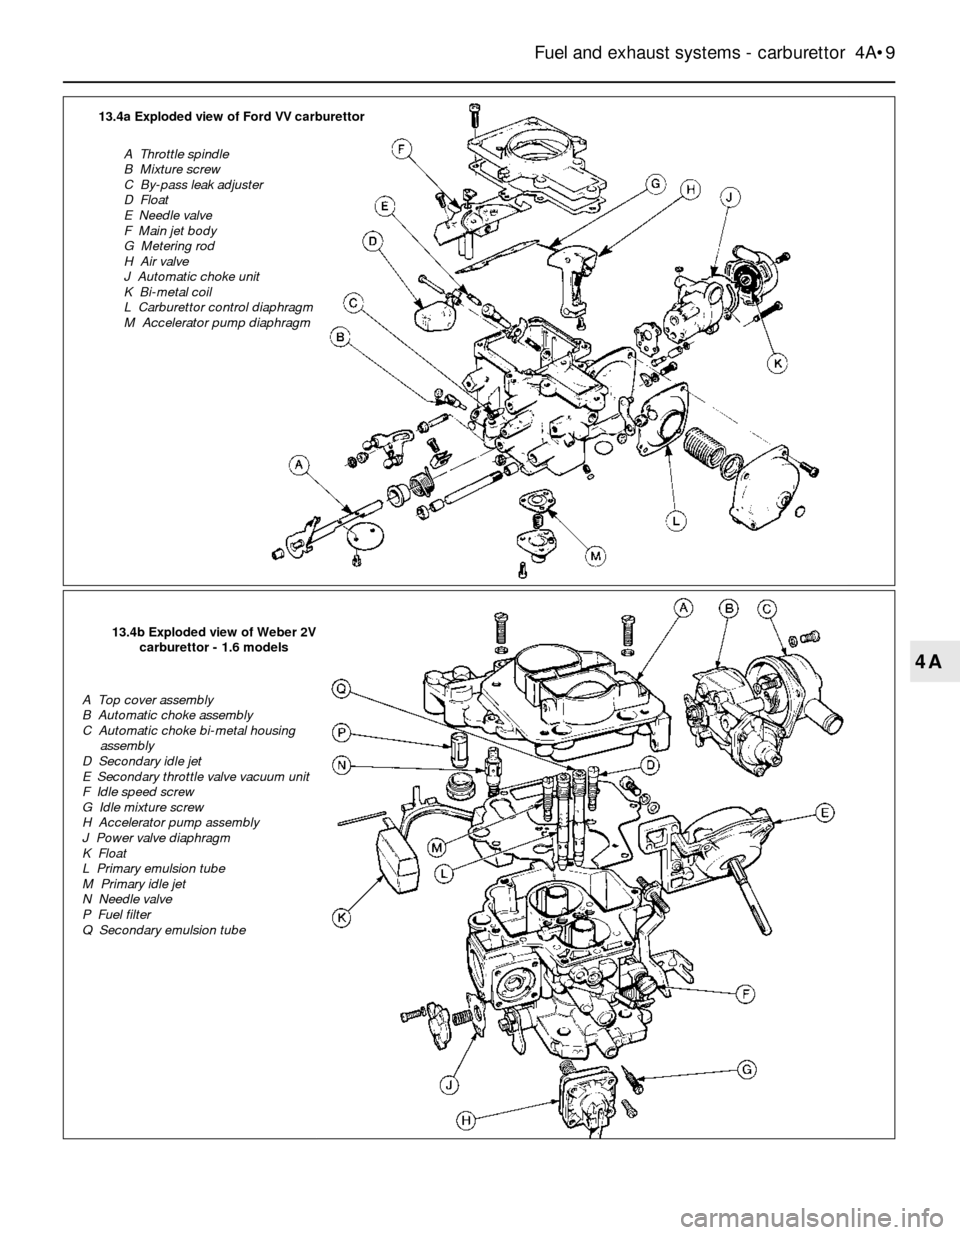 FORD SIERRA 1984 1.G Fuel And Exhaust Systems Carburettor Workshop Manual Fuel and exhaust systems - carburettor  4A•9
4A
13.4a Exploded view of Ford VV carburettor
A  Throttle spindle
B  Mixture screw
C  By-pass leak adjuster
D  Float
E  Needle valve
F  Main jet body
G  